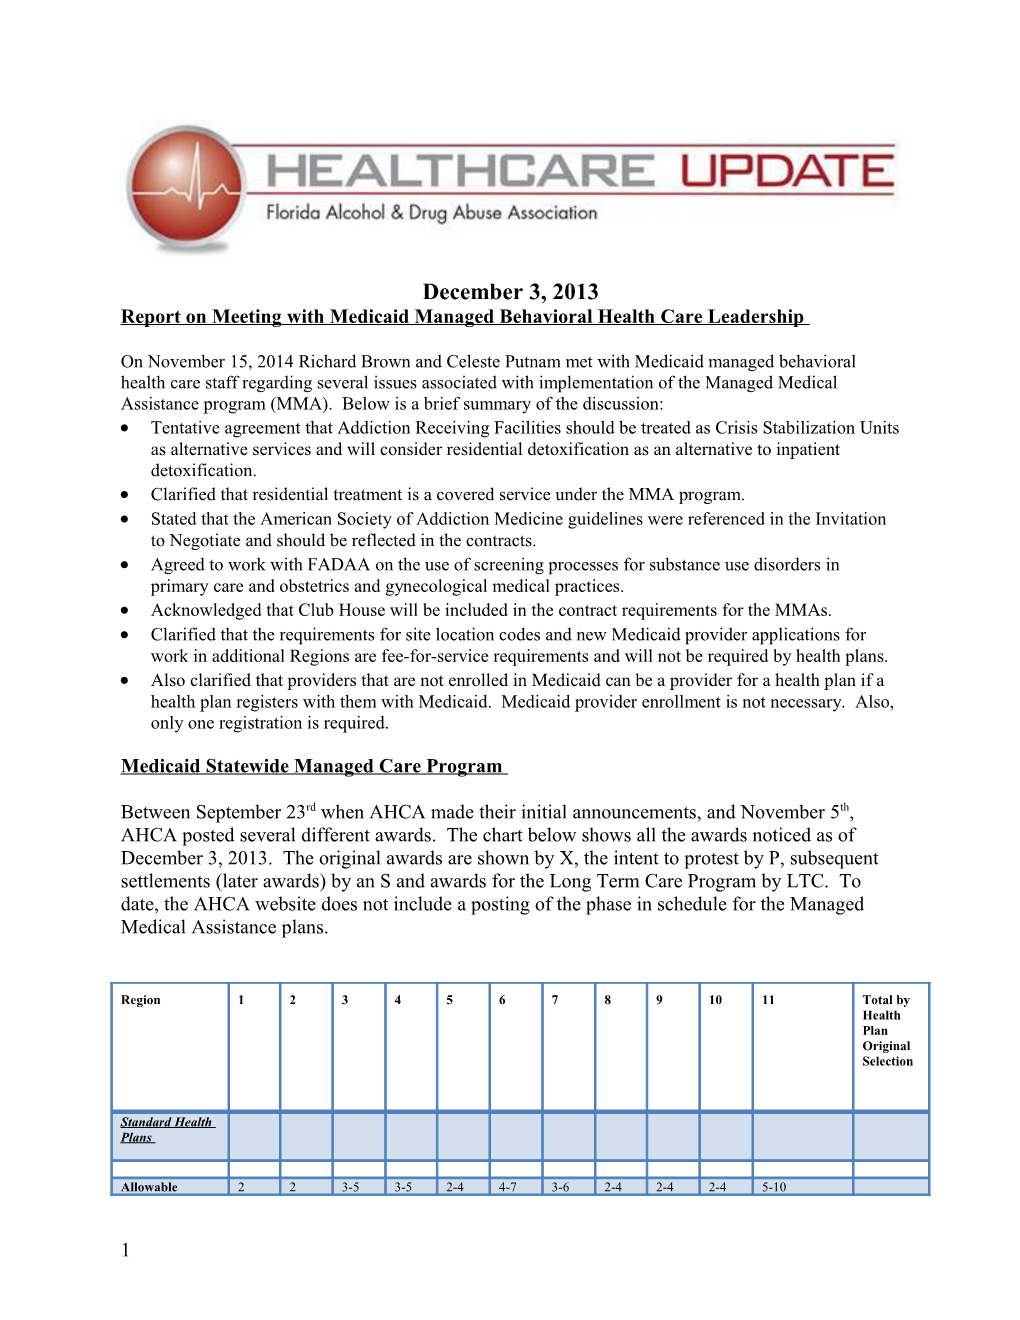 Report on Meeting with Medicaid Managed Behavioral Health Care Leadership